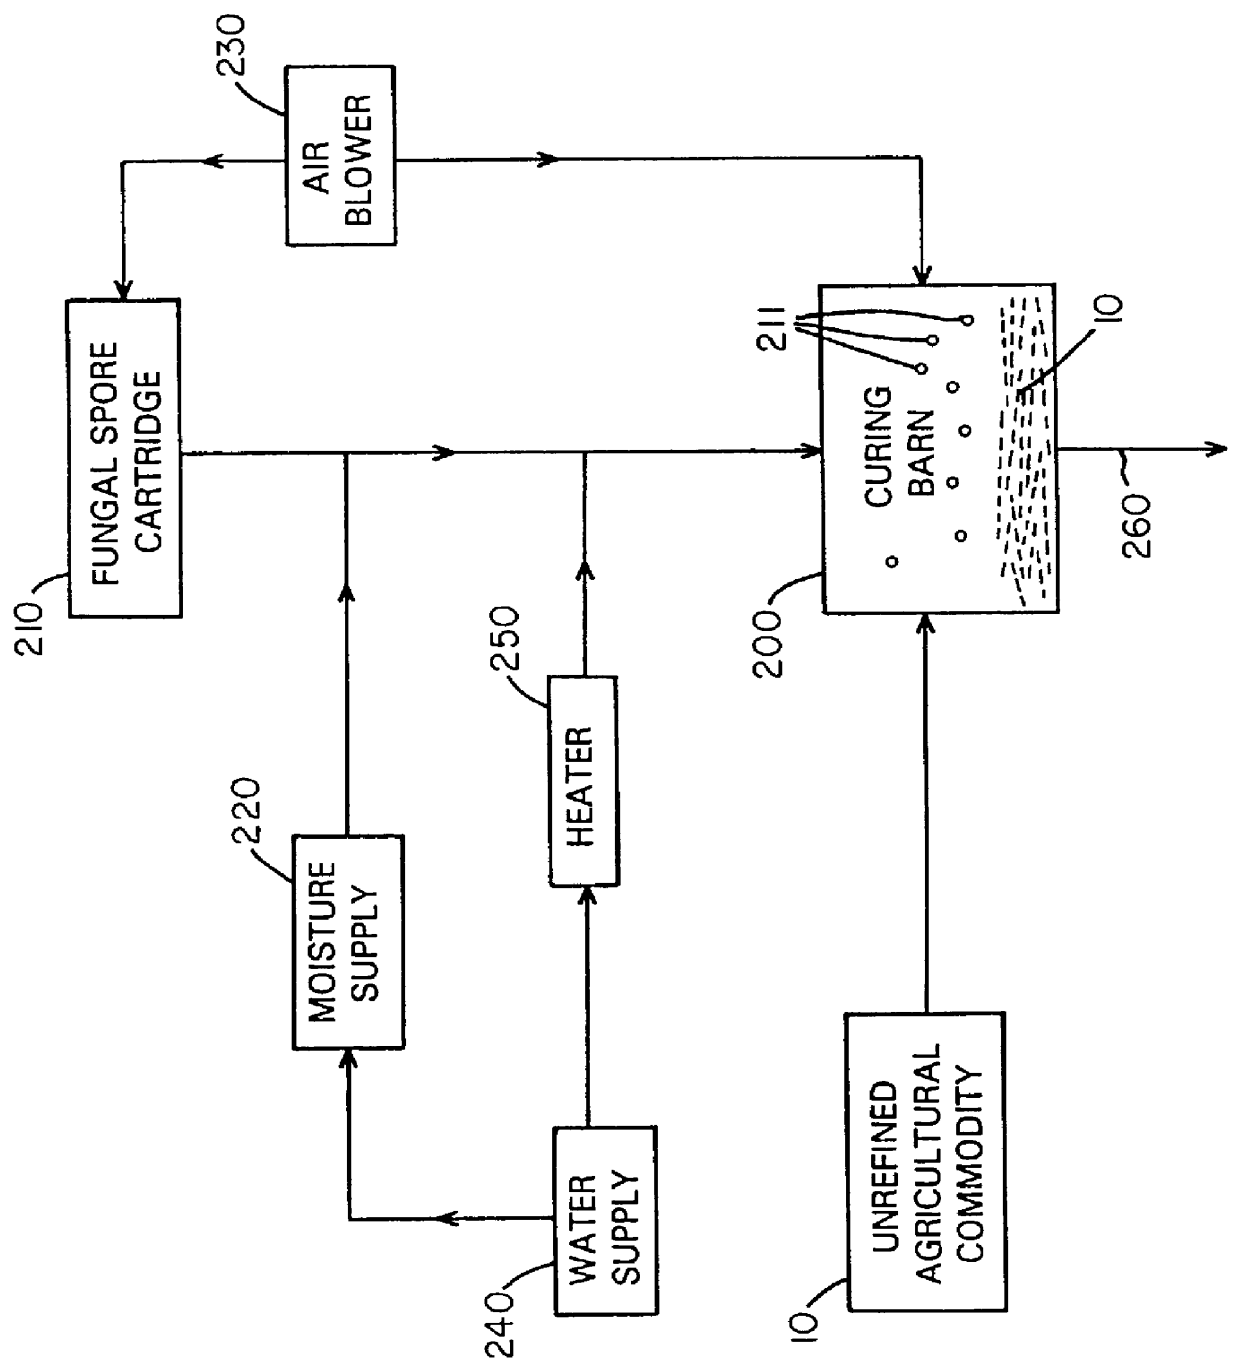 Method and system for assay and removal of harmful toxins during processing of tobacco products